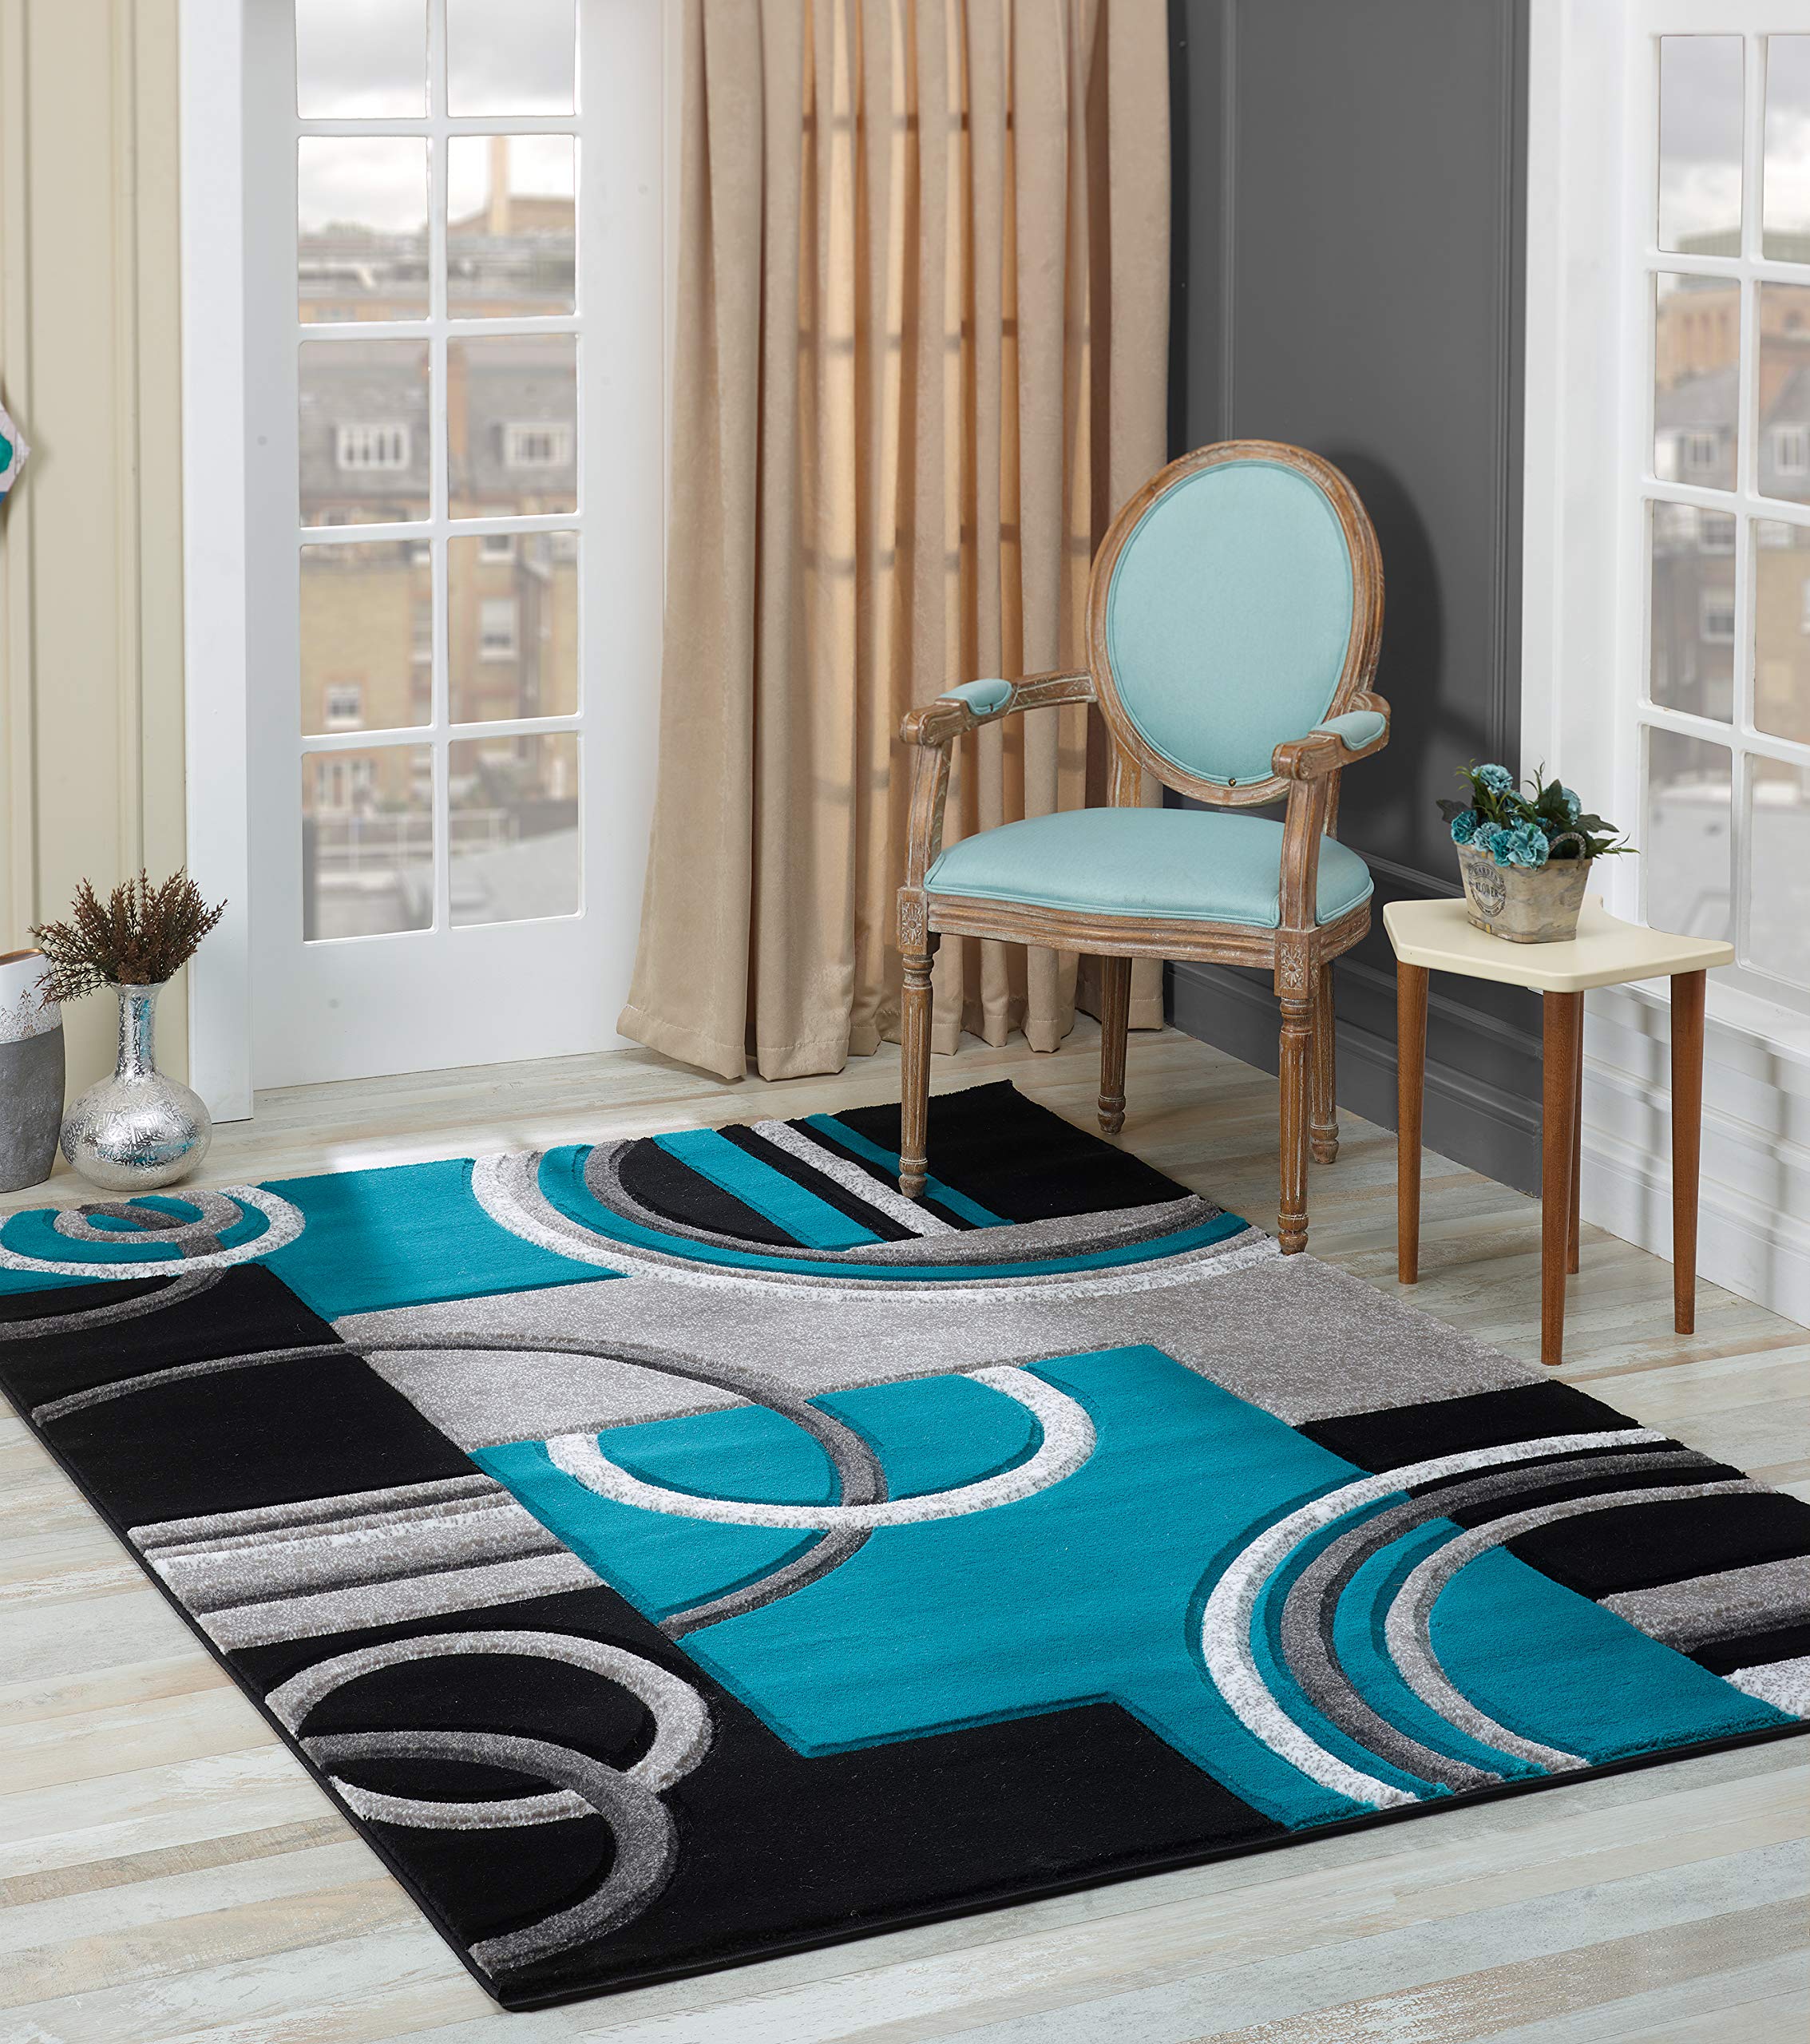 GLORY RUGS Area Rug Modern 5x7 Turquoise Soft Hand Carved Contemporary Floor Carpet with Premium Fluffy Texture for Indoor Living Dining Room and B...